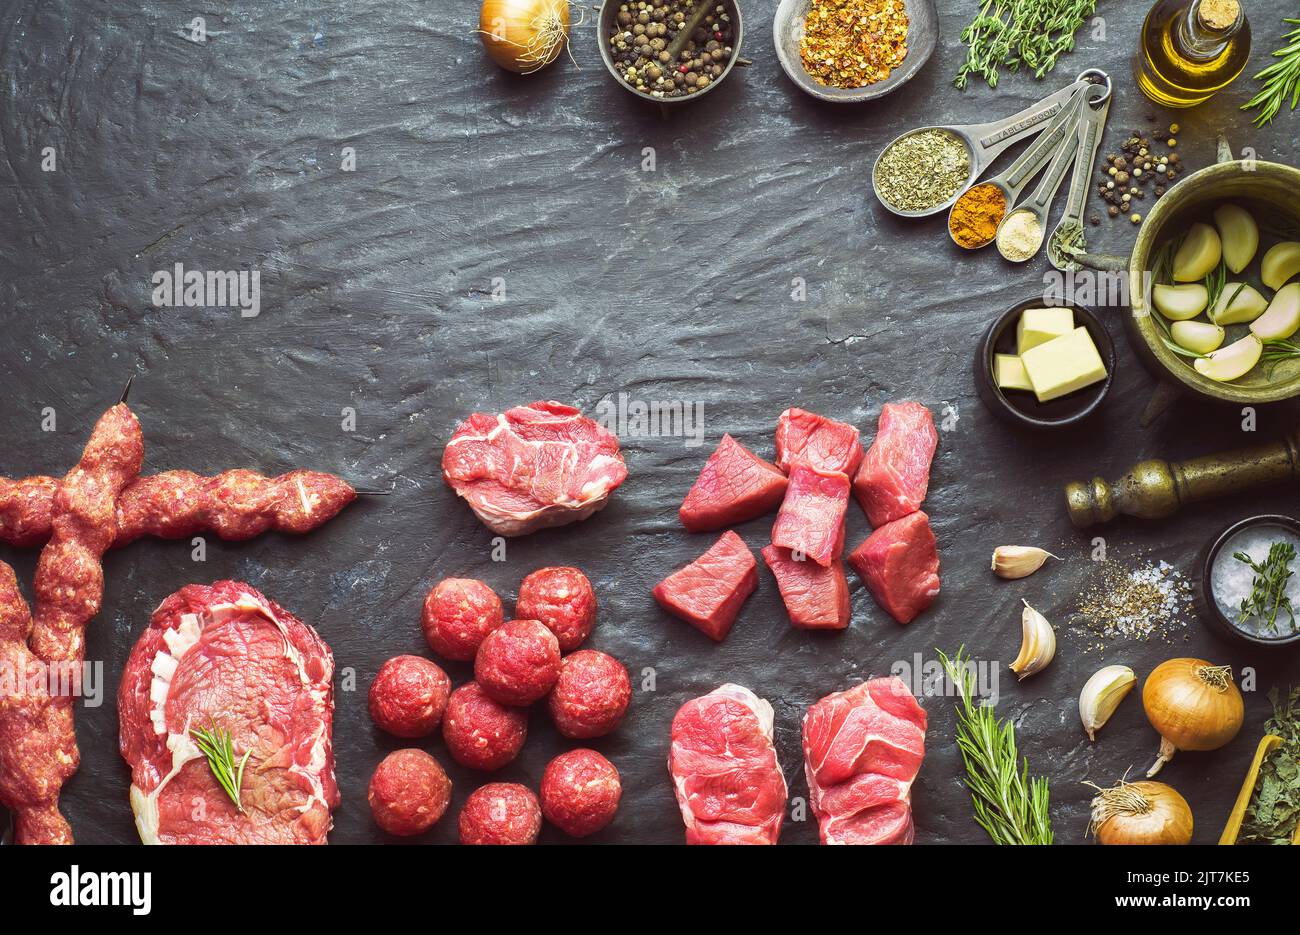 Arabic cuisine; Different types of fresh raw meat placed with fresh organic ingredients. Top view with copy space. Stock Photo